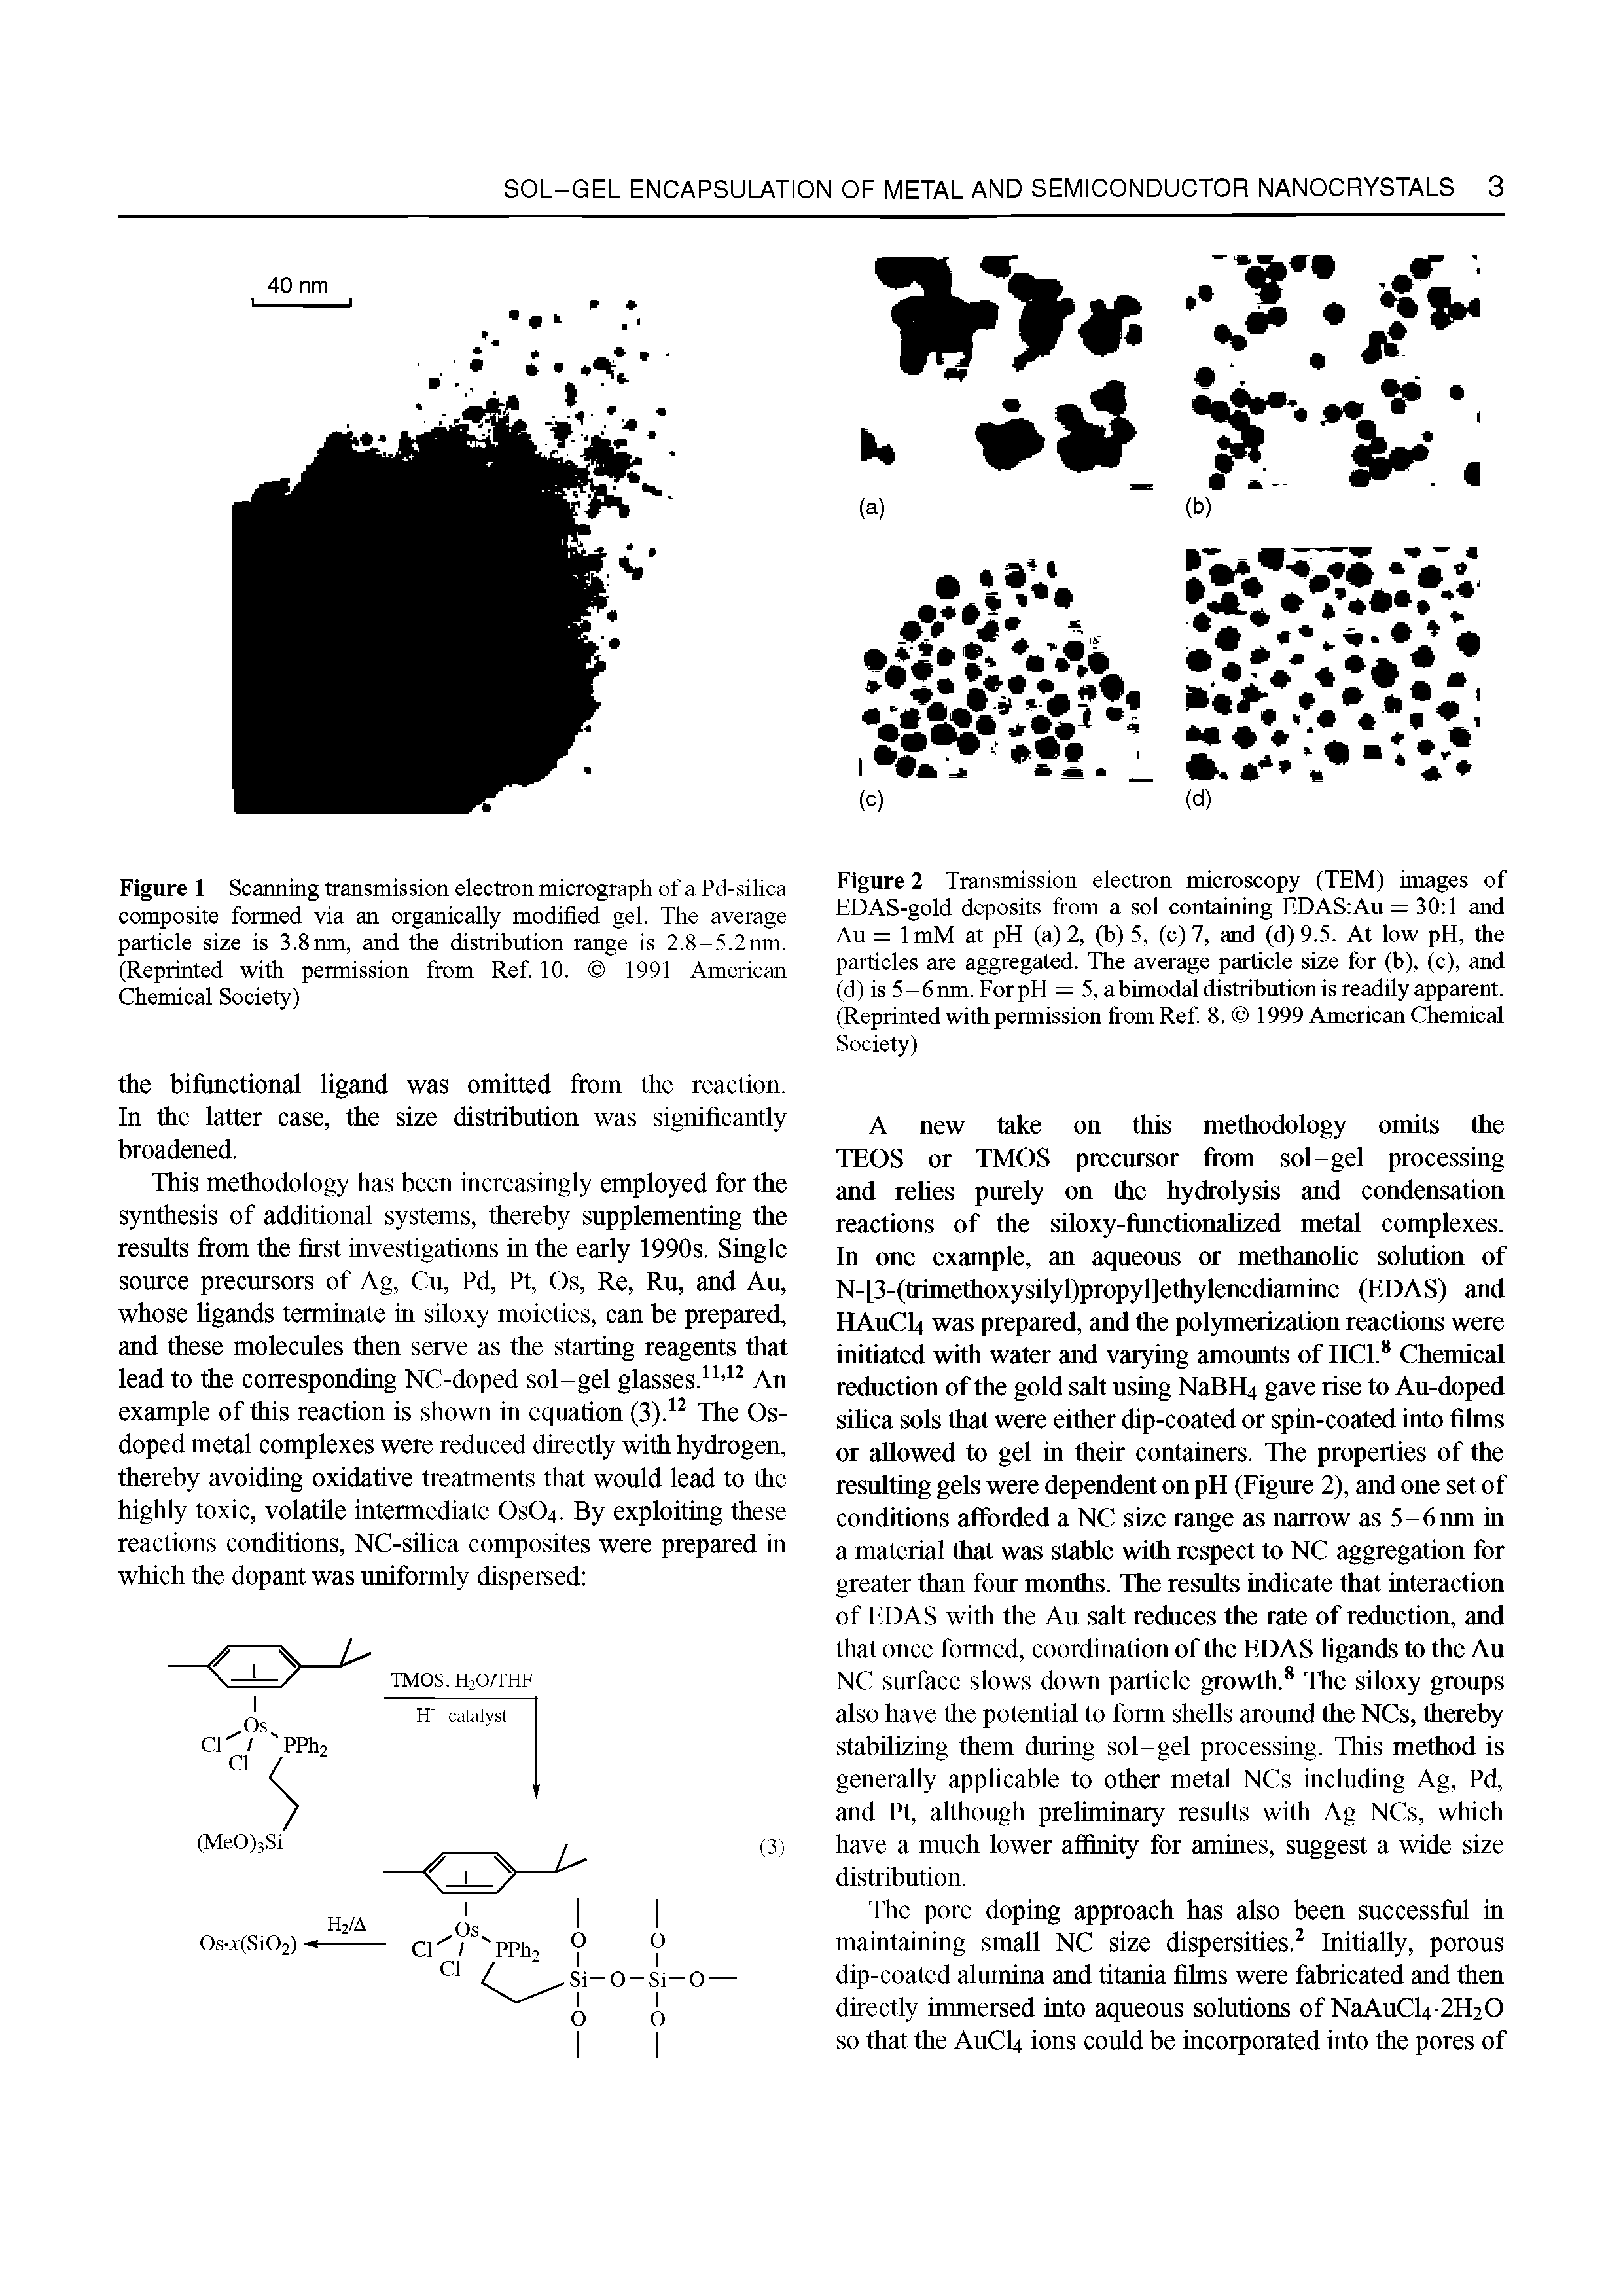 Figure 1 Scanning transmission electron micrograph of a Pd-silica composite formed via an organically modified gel. The average particle size is 3.8nm, and the distribution range is 2.8-5.2nm. (Reprinted with permission from Ref. 10. 1991 American Chemical Society)...